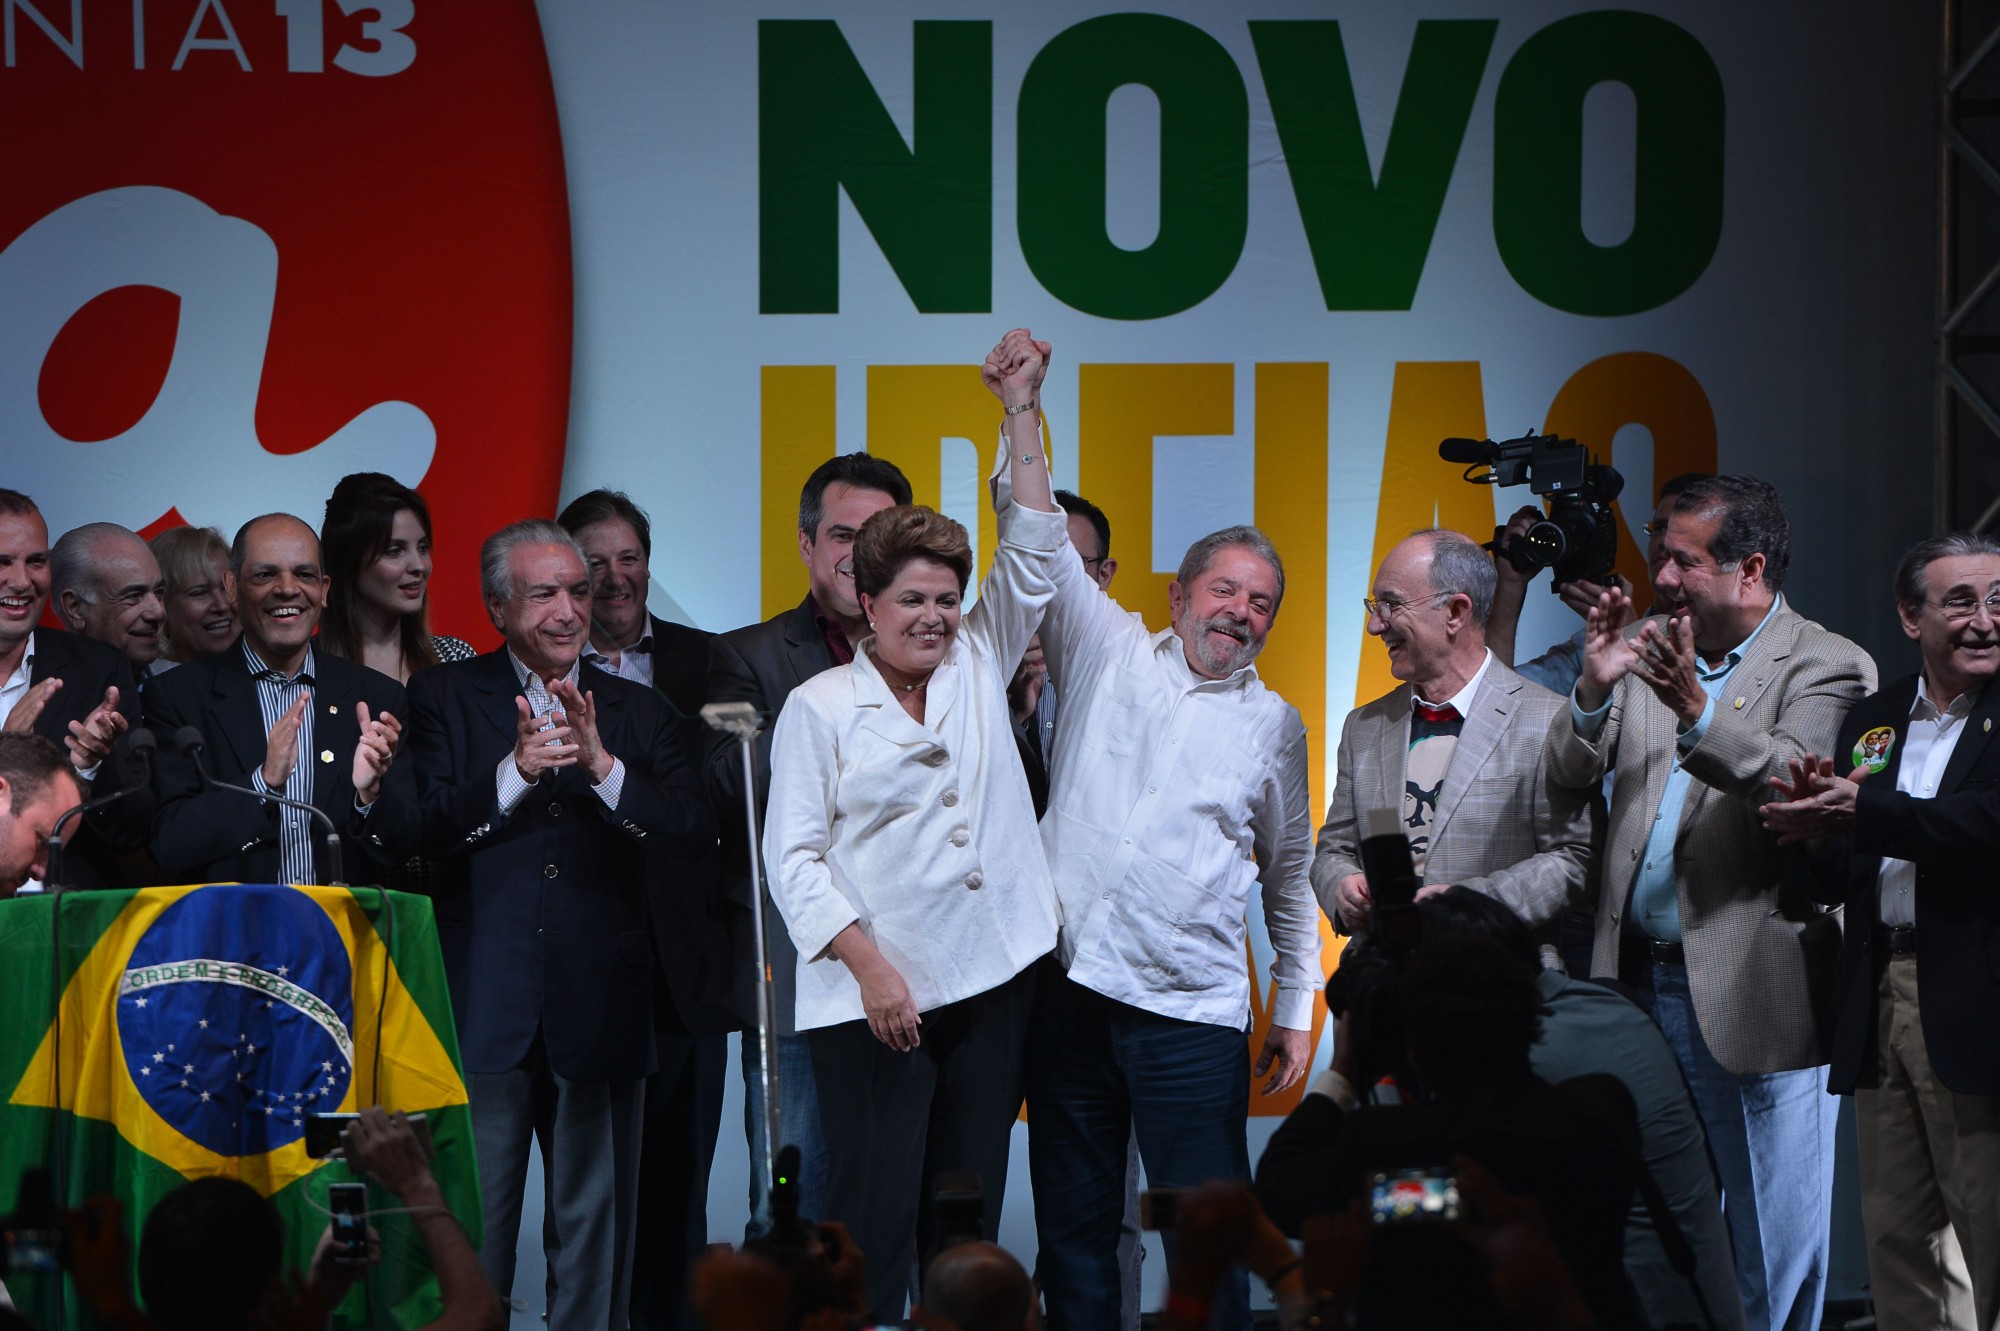 Dilma Rousseff Re-Elected as Brazil’s President